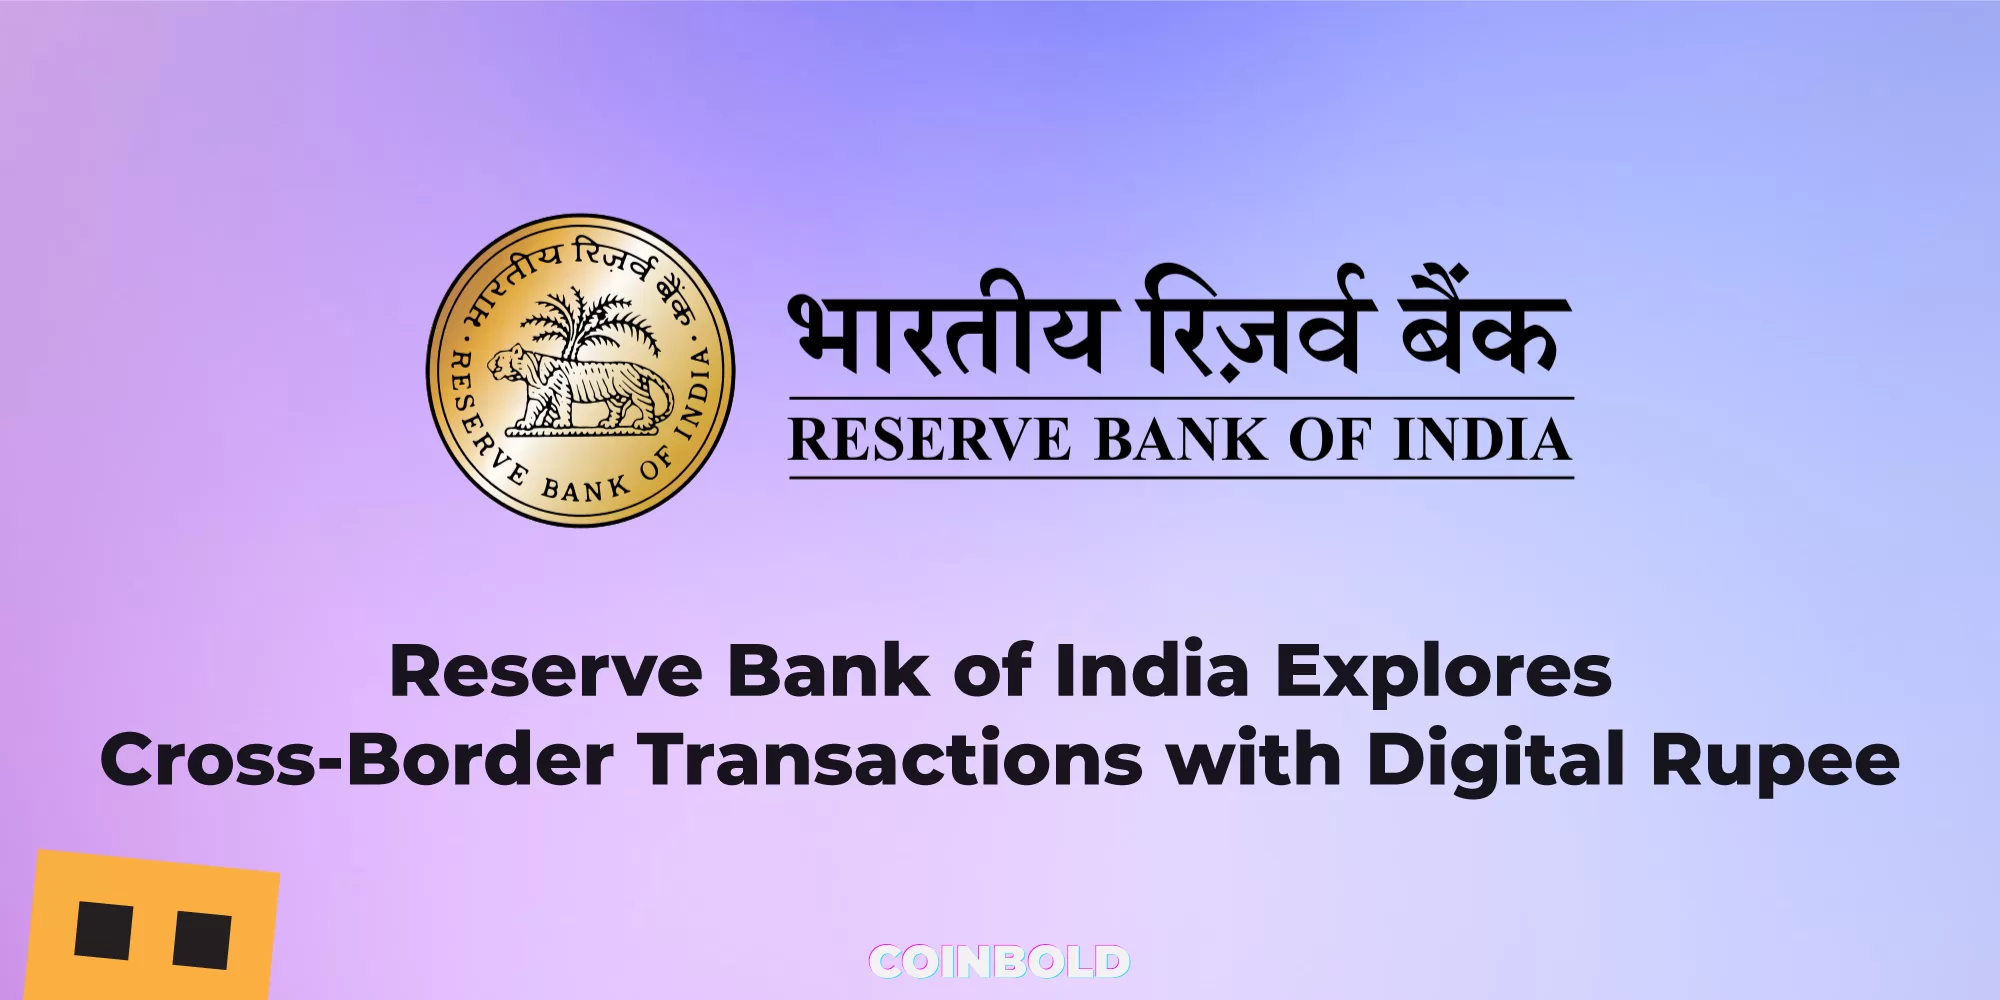 Reserve Bank of India Explores Cross-Border Transactions with Digital Rupee